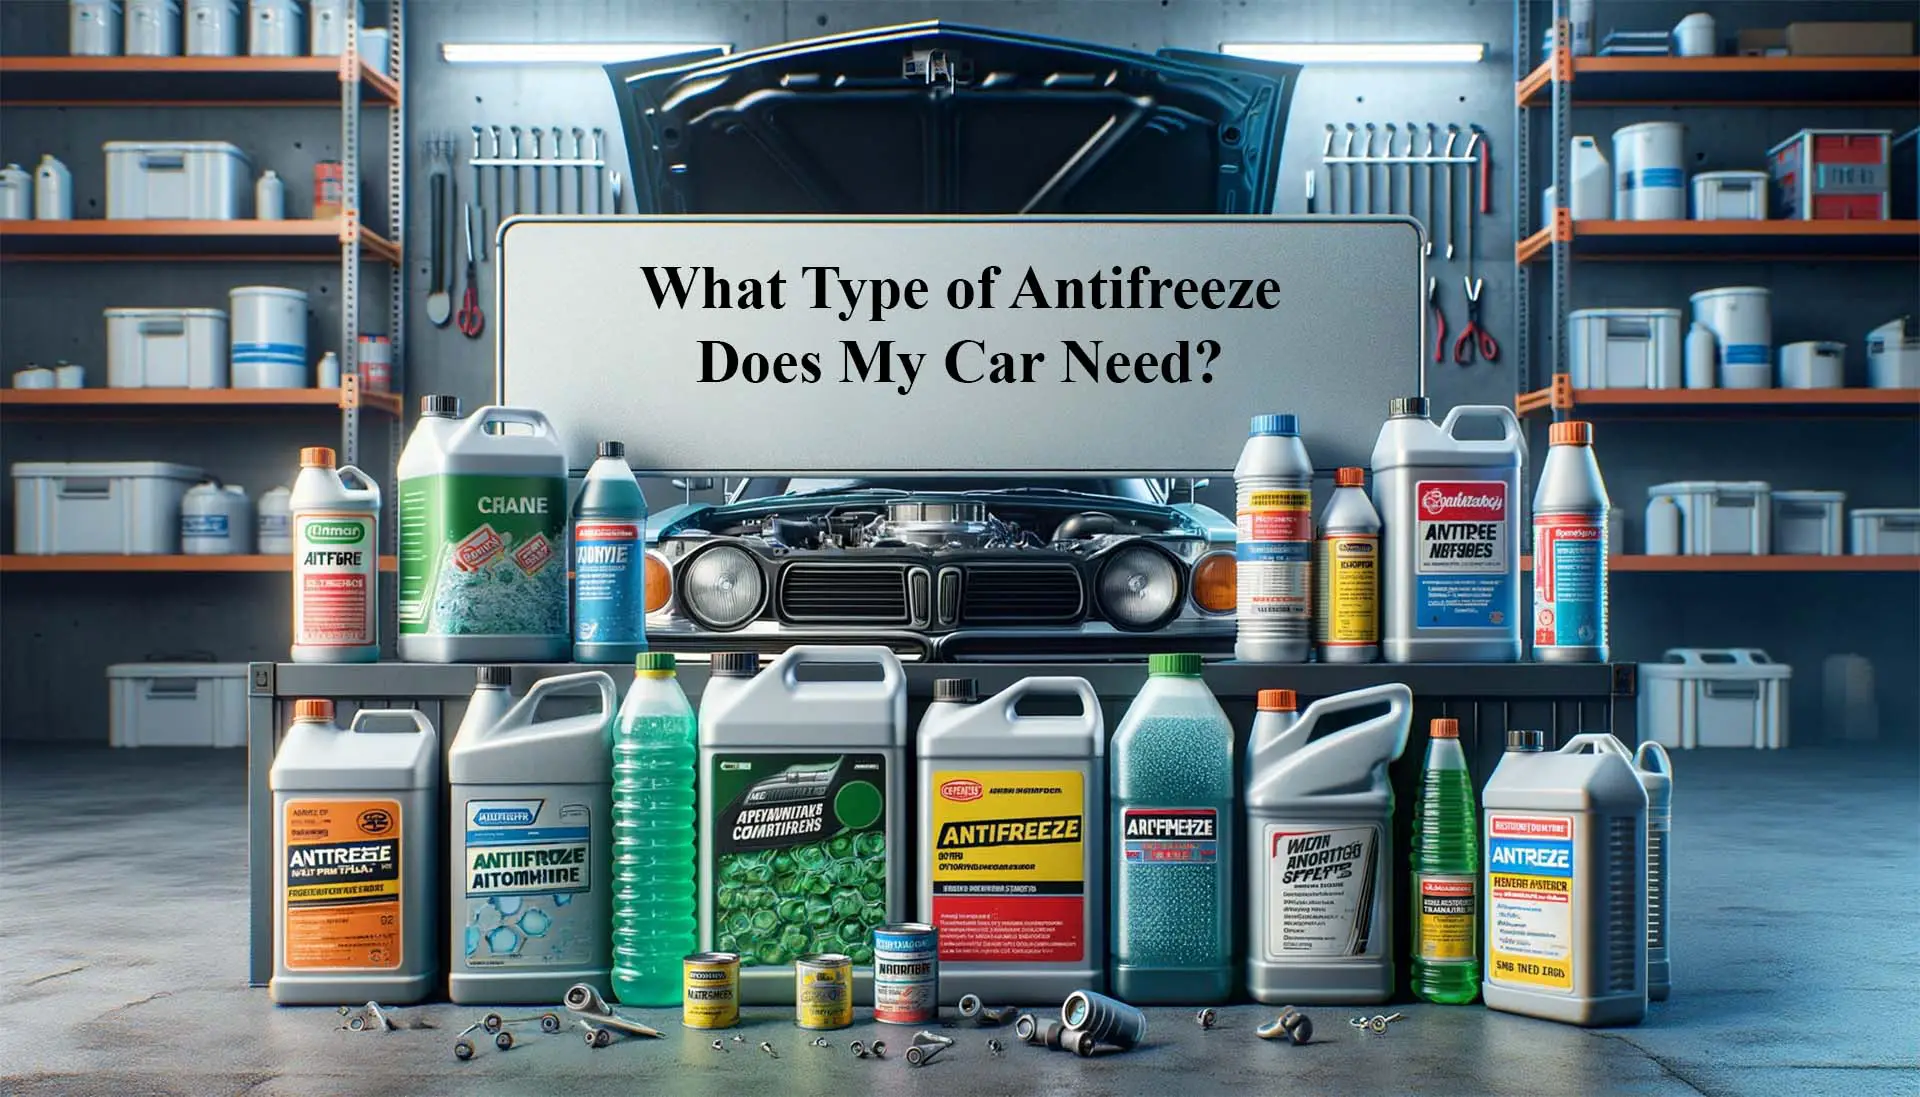 What Type of Antifreeze Does My Car Need?